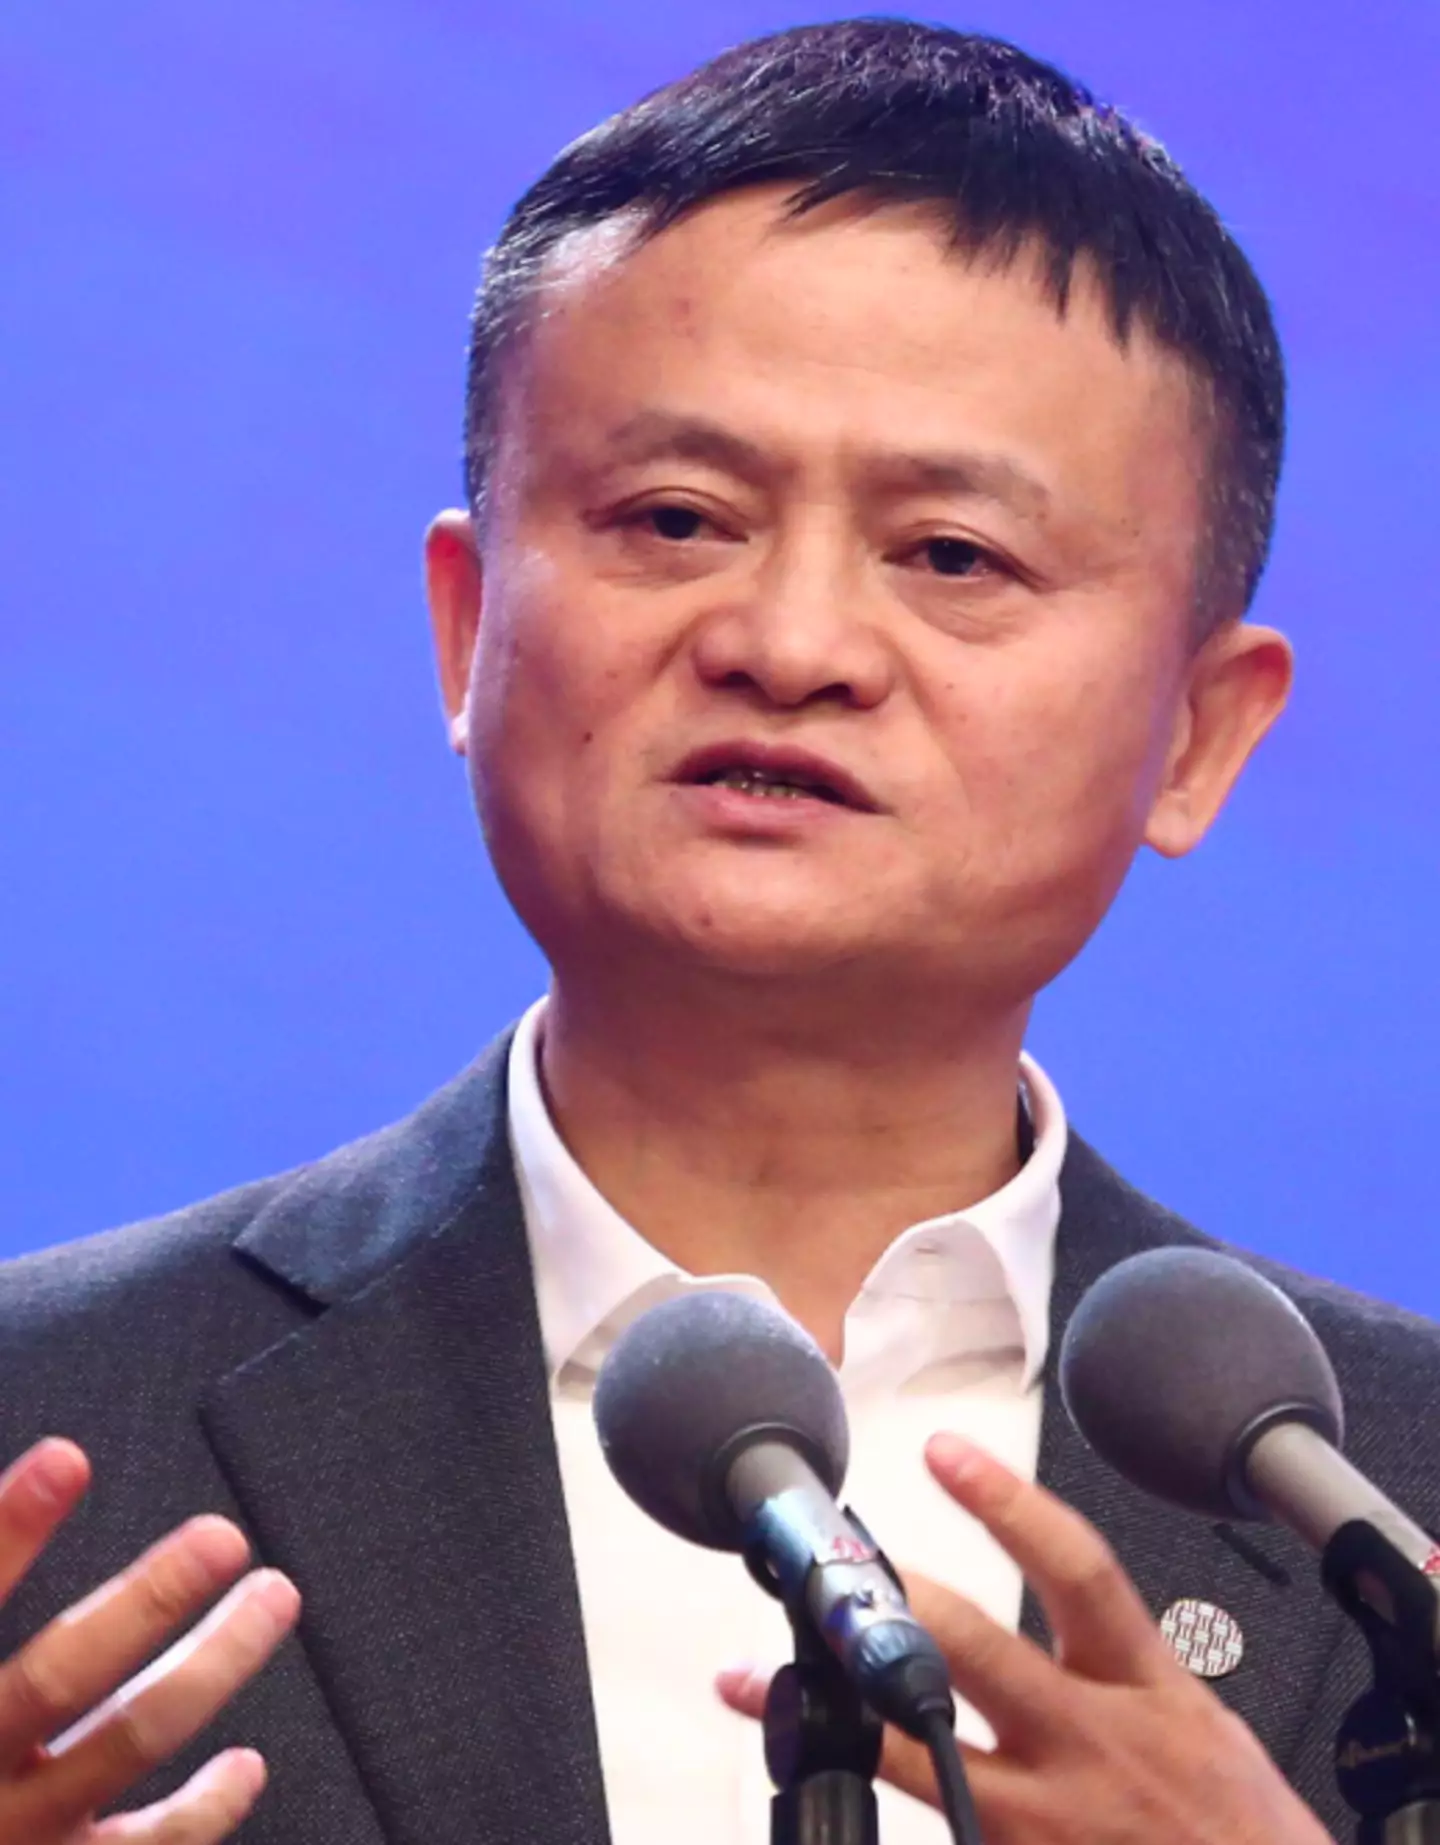 Jack Ma is the co-founder of e-commerce company Alibaba.